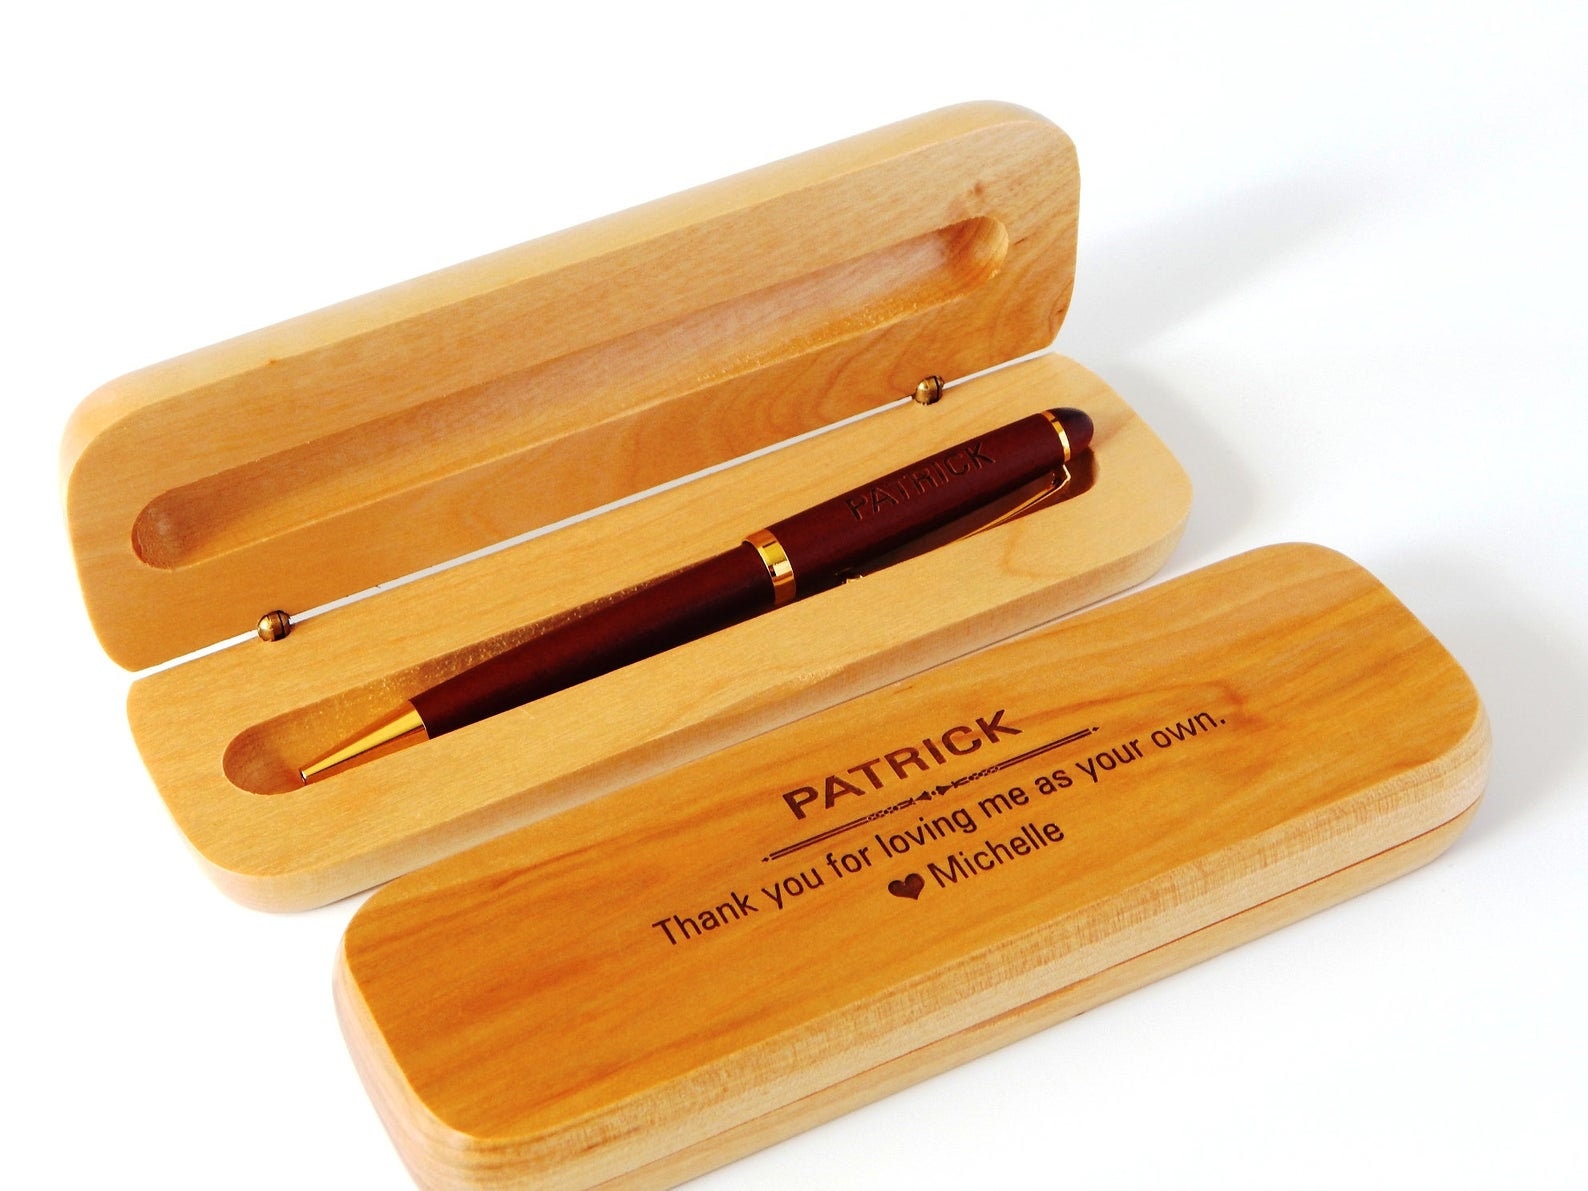 Christian Gifts for Men Dad Christmas Gift From Daughter Personalized  Wooden Pen Religious Gift for Him 